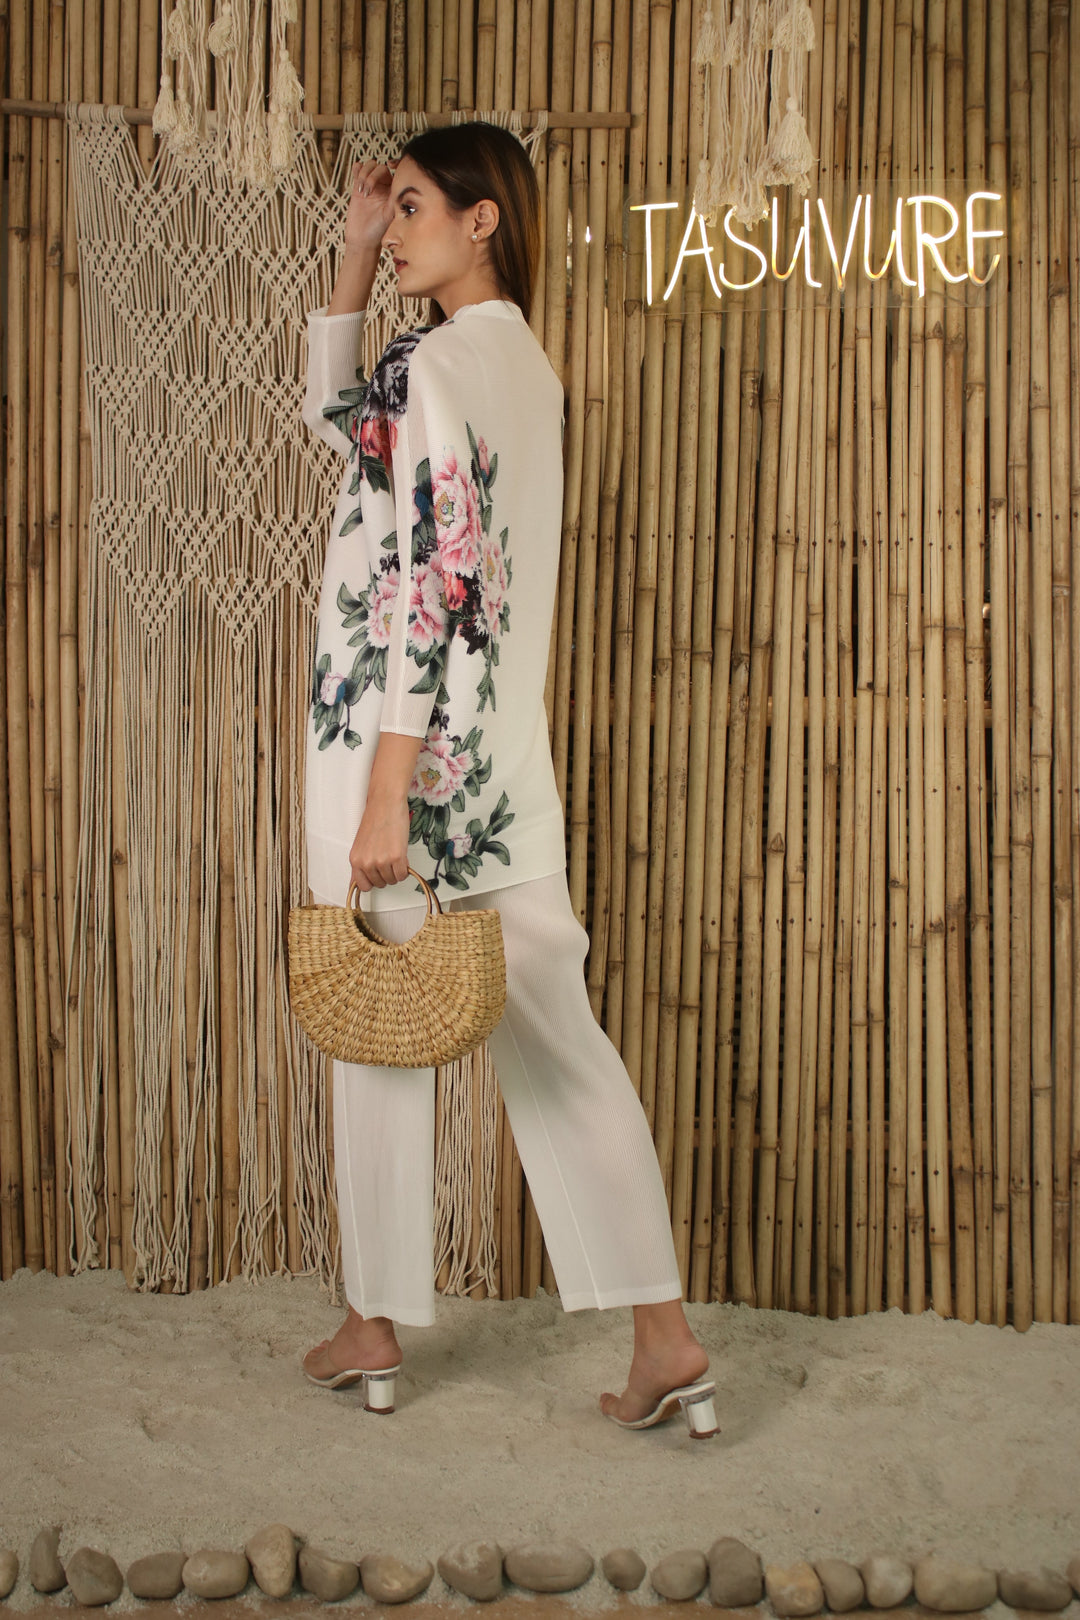 The floral shirt comes with center front button closure, dolman sleeves and an ankle length pleated pants.